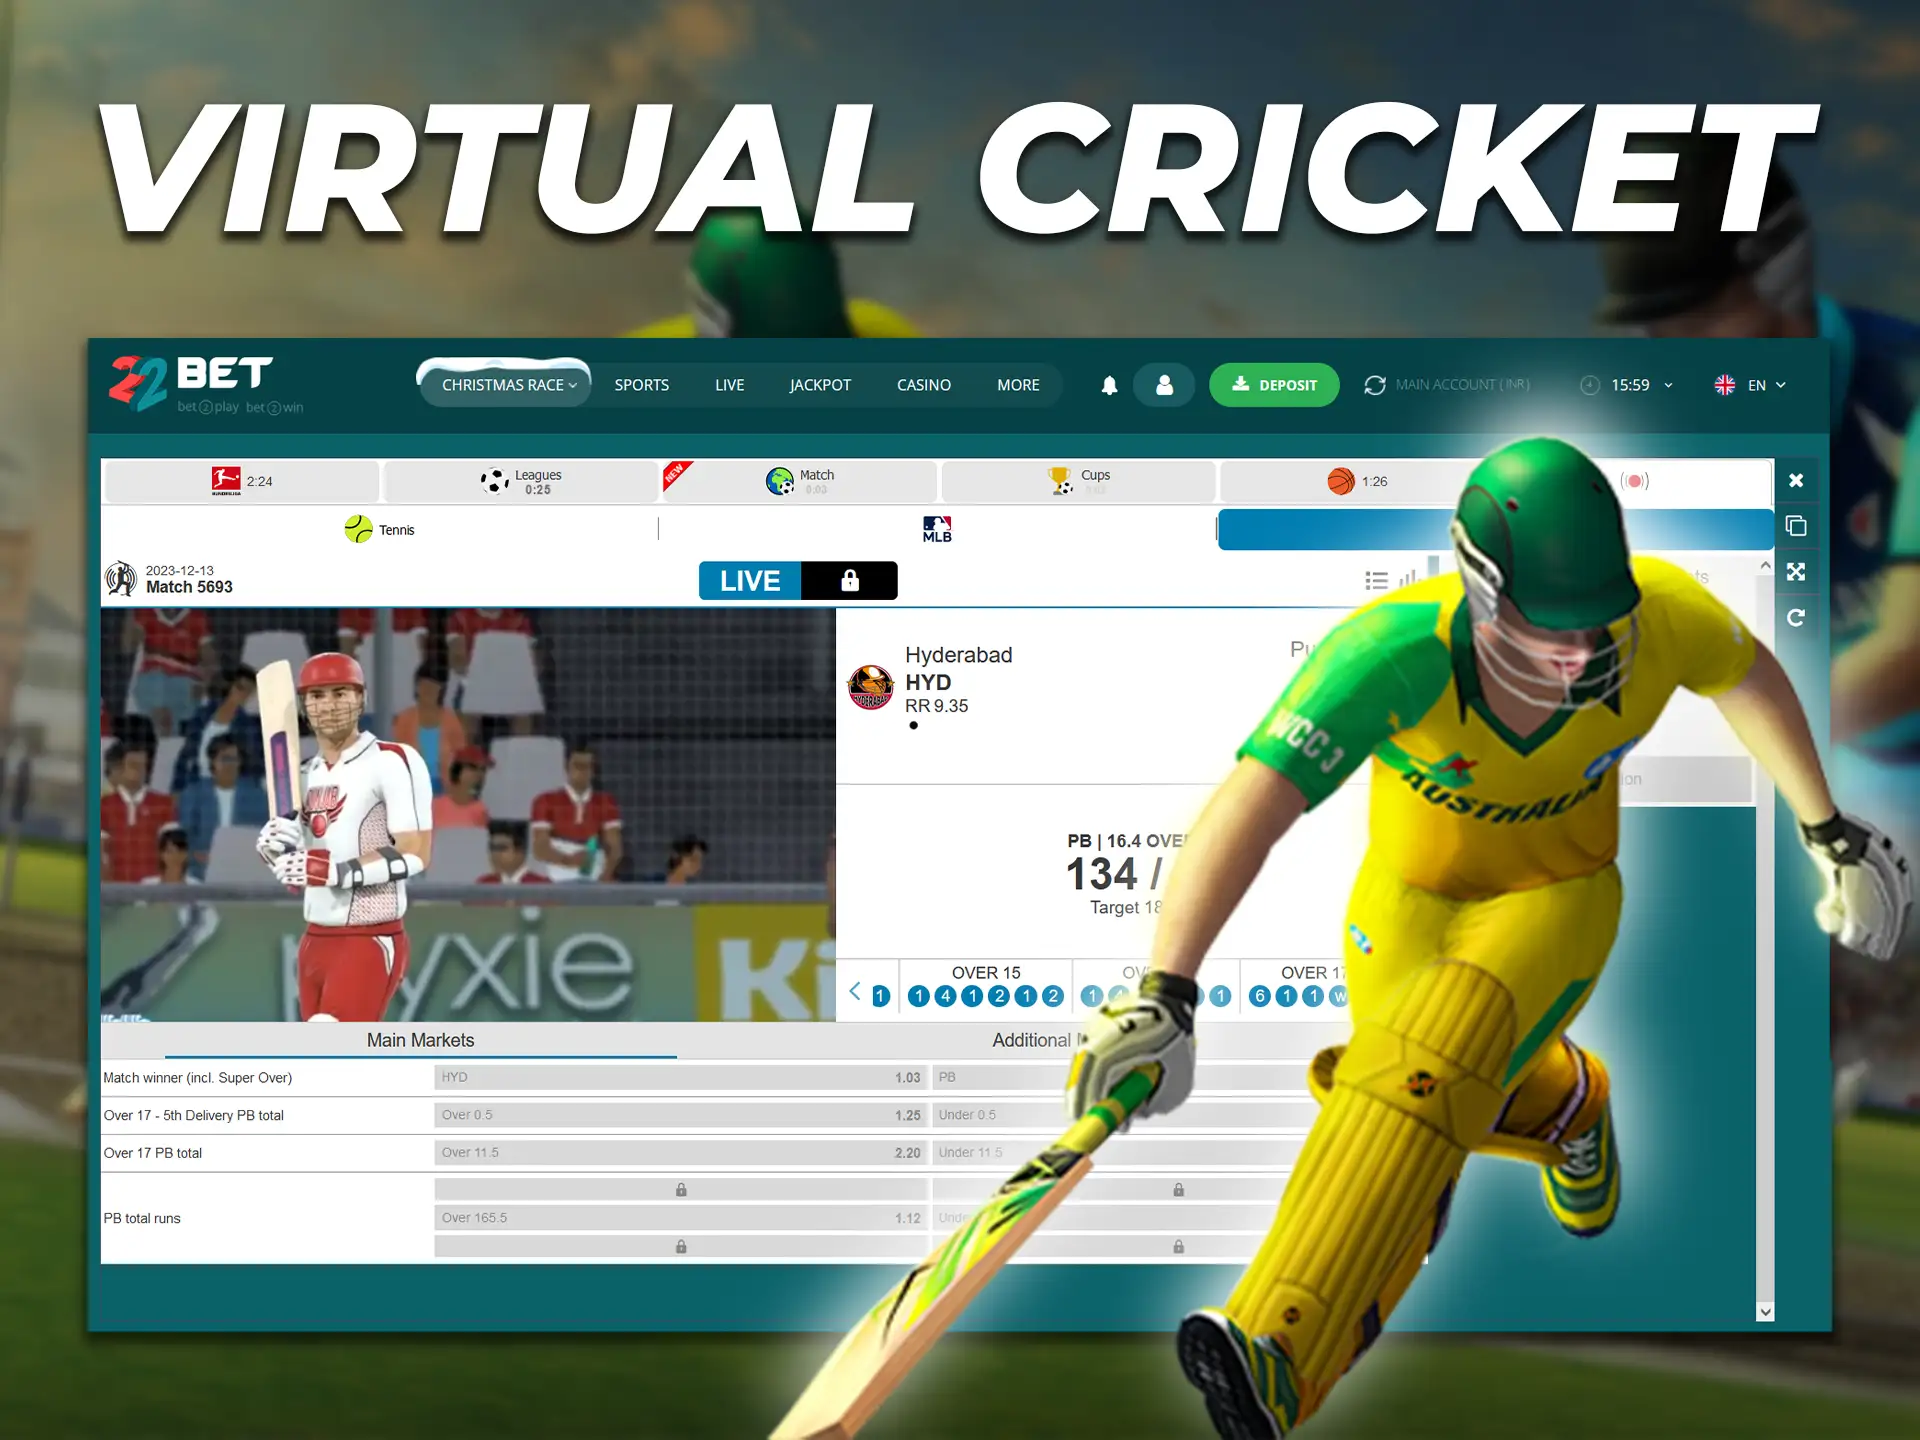 Betting on simulated cricket matches is available for Indian players.